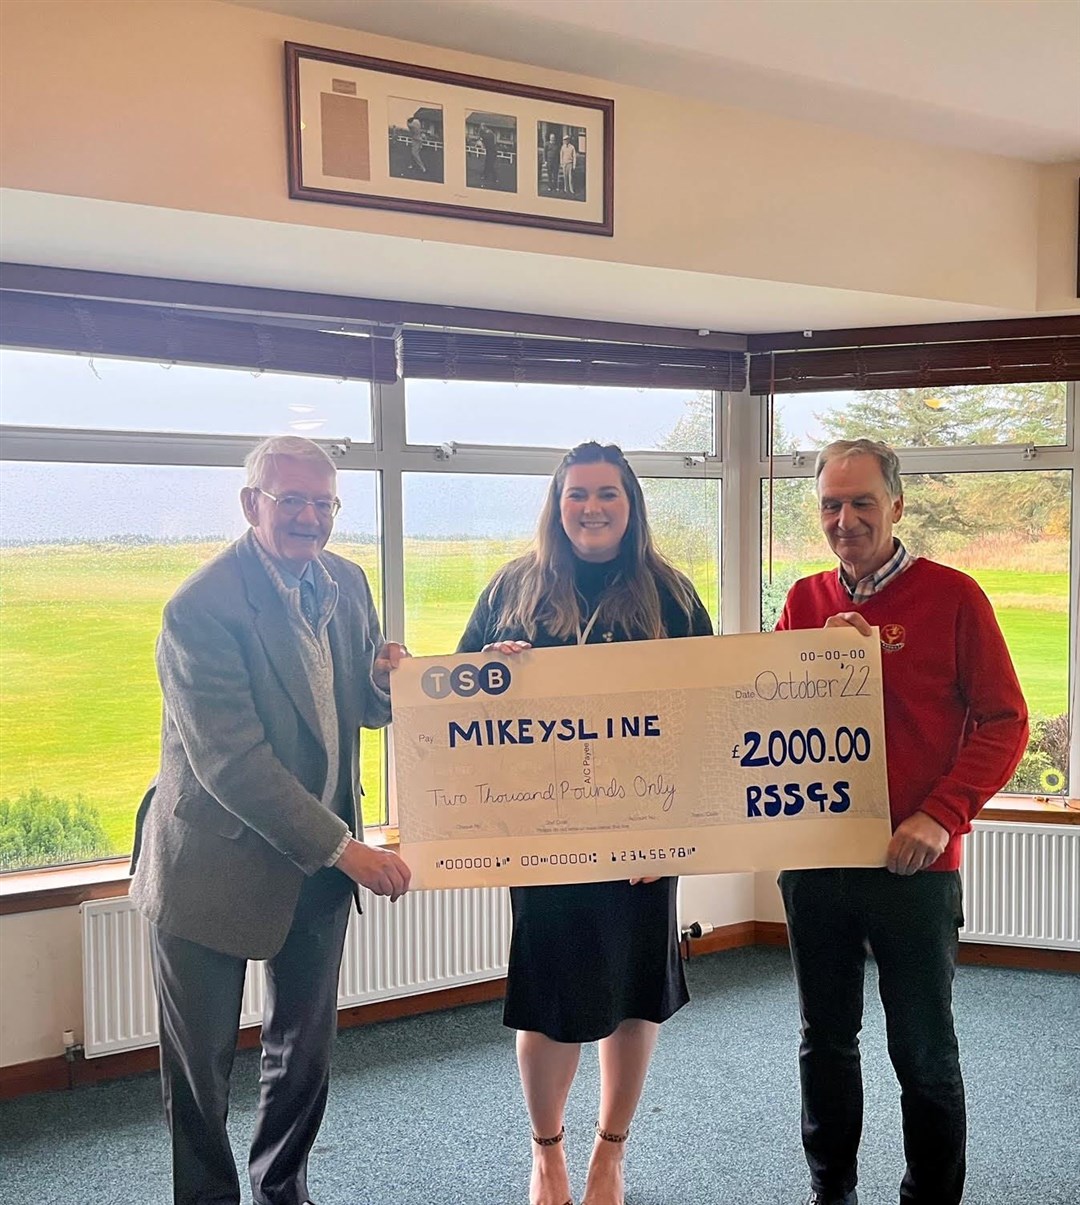 Katie Melville, Mikeysline fundraising manager, received the cheque at Tain Golf Club from Ross and Sutherland Seniors Golf Society chairman Ian McCree and secretary Steven Lloyd.